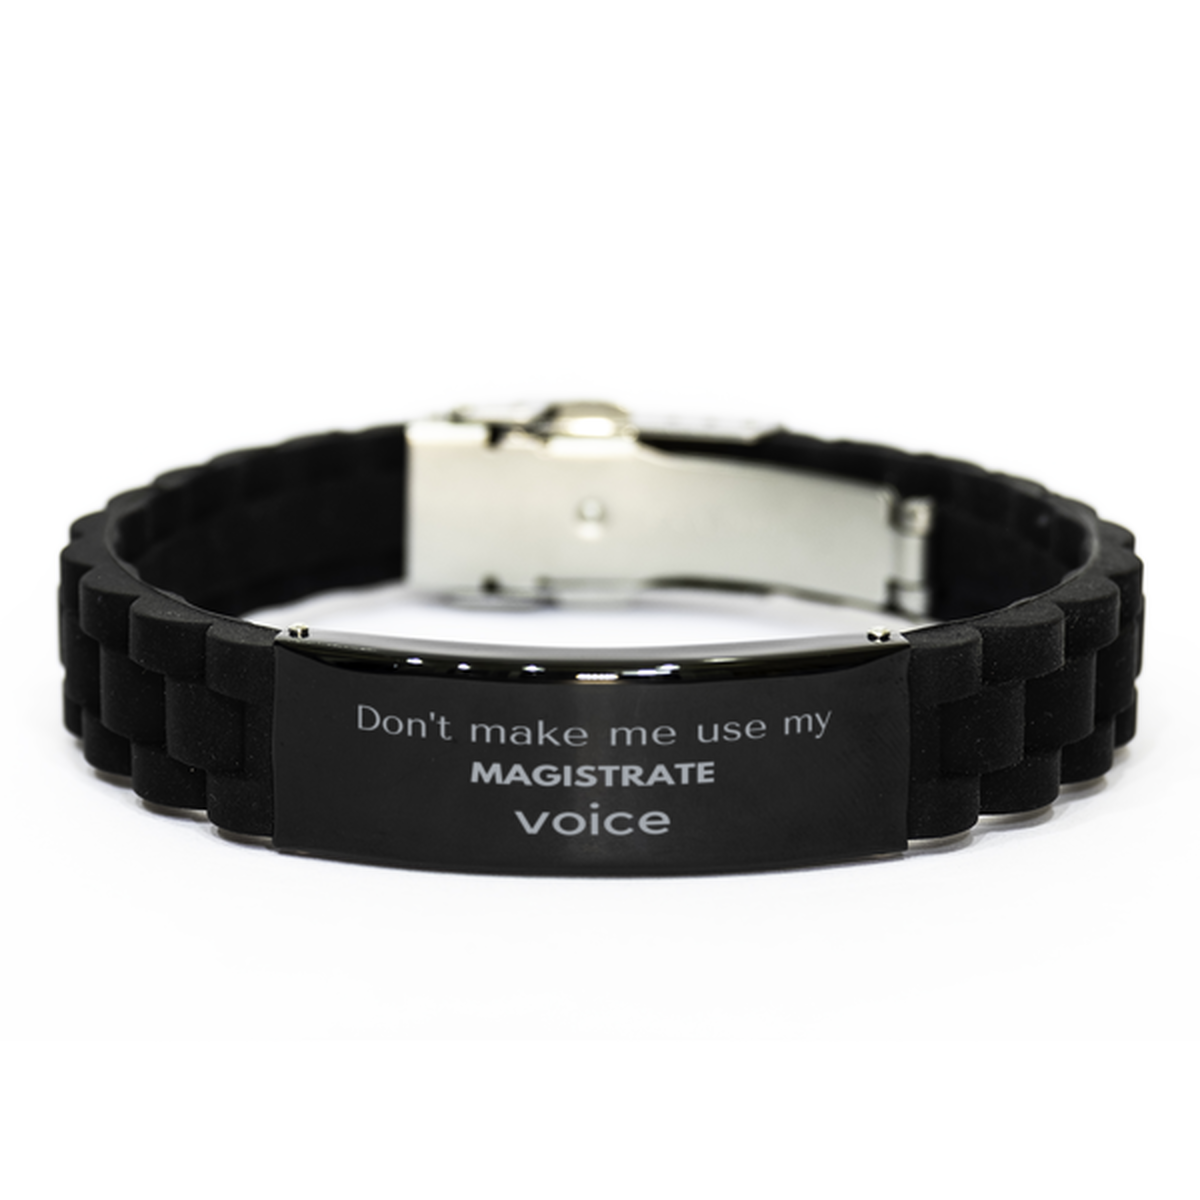 Don't make me use my Magistrate voice, Sarcasm Magistrate Gifts, Christmas Magistrate Black Glidelock Clasp Bracelet Birthday Unique Gifts For Magistrate Coworkers, Men, Women, Colleague, Friends